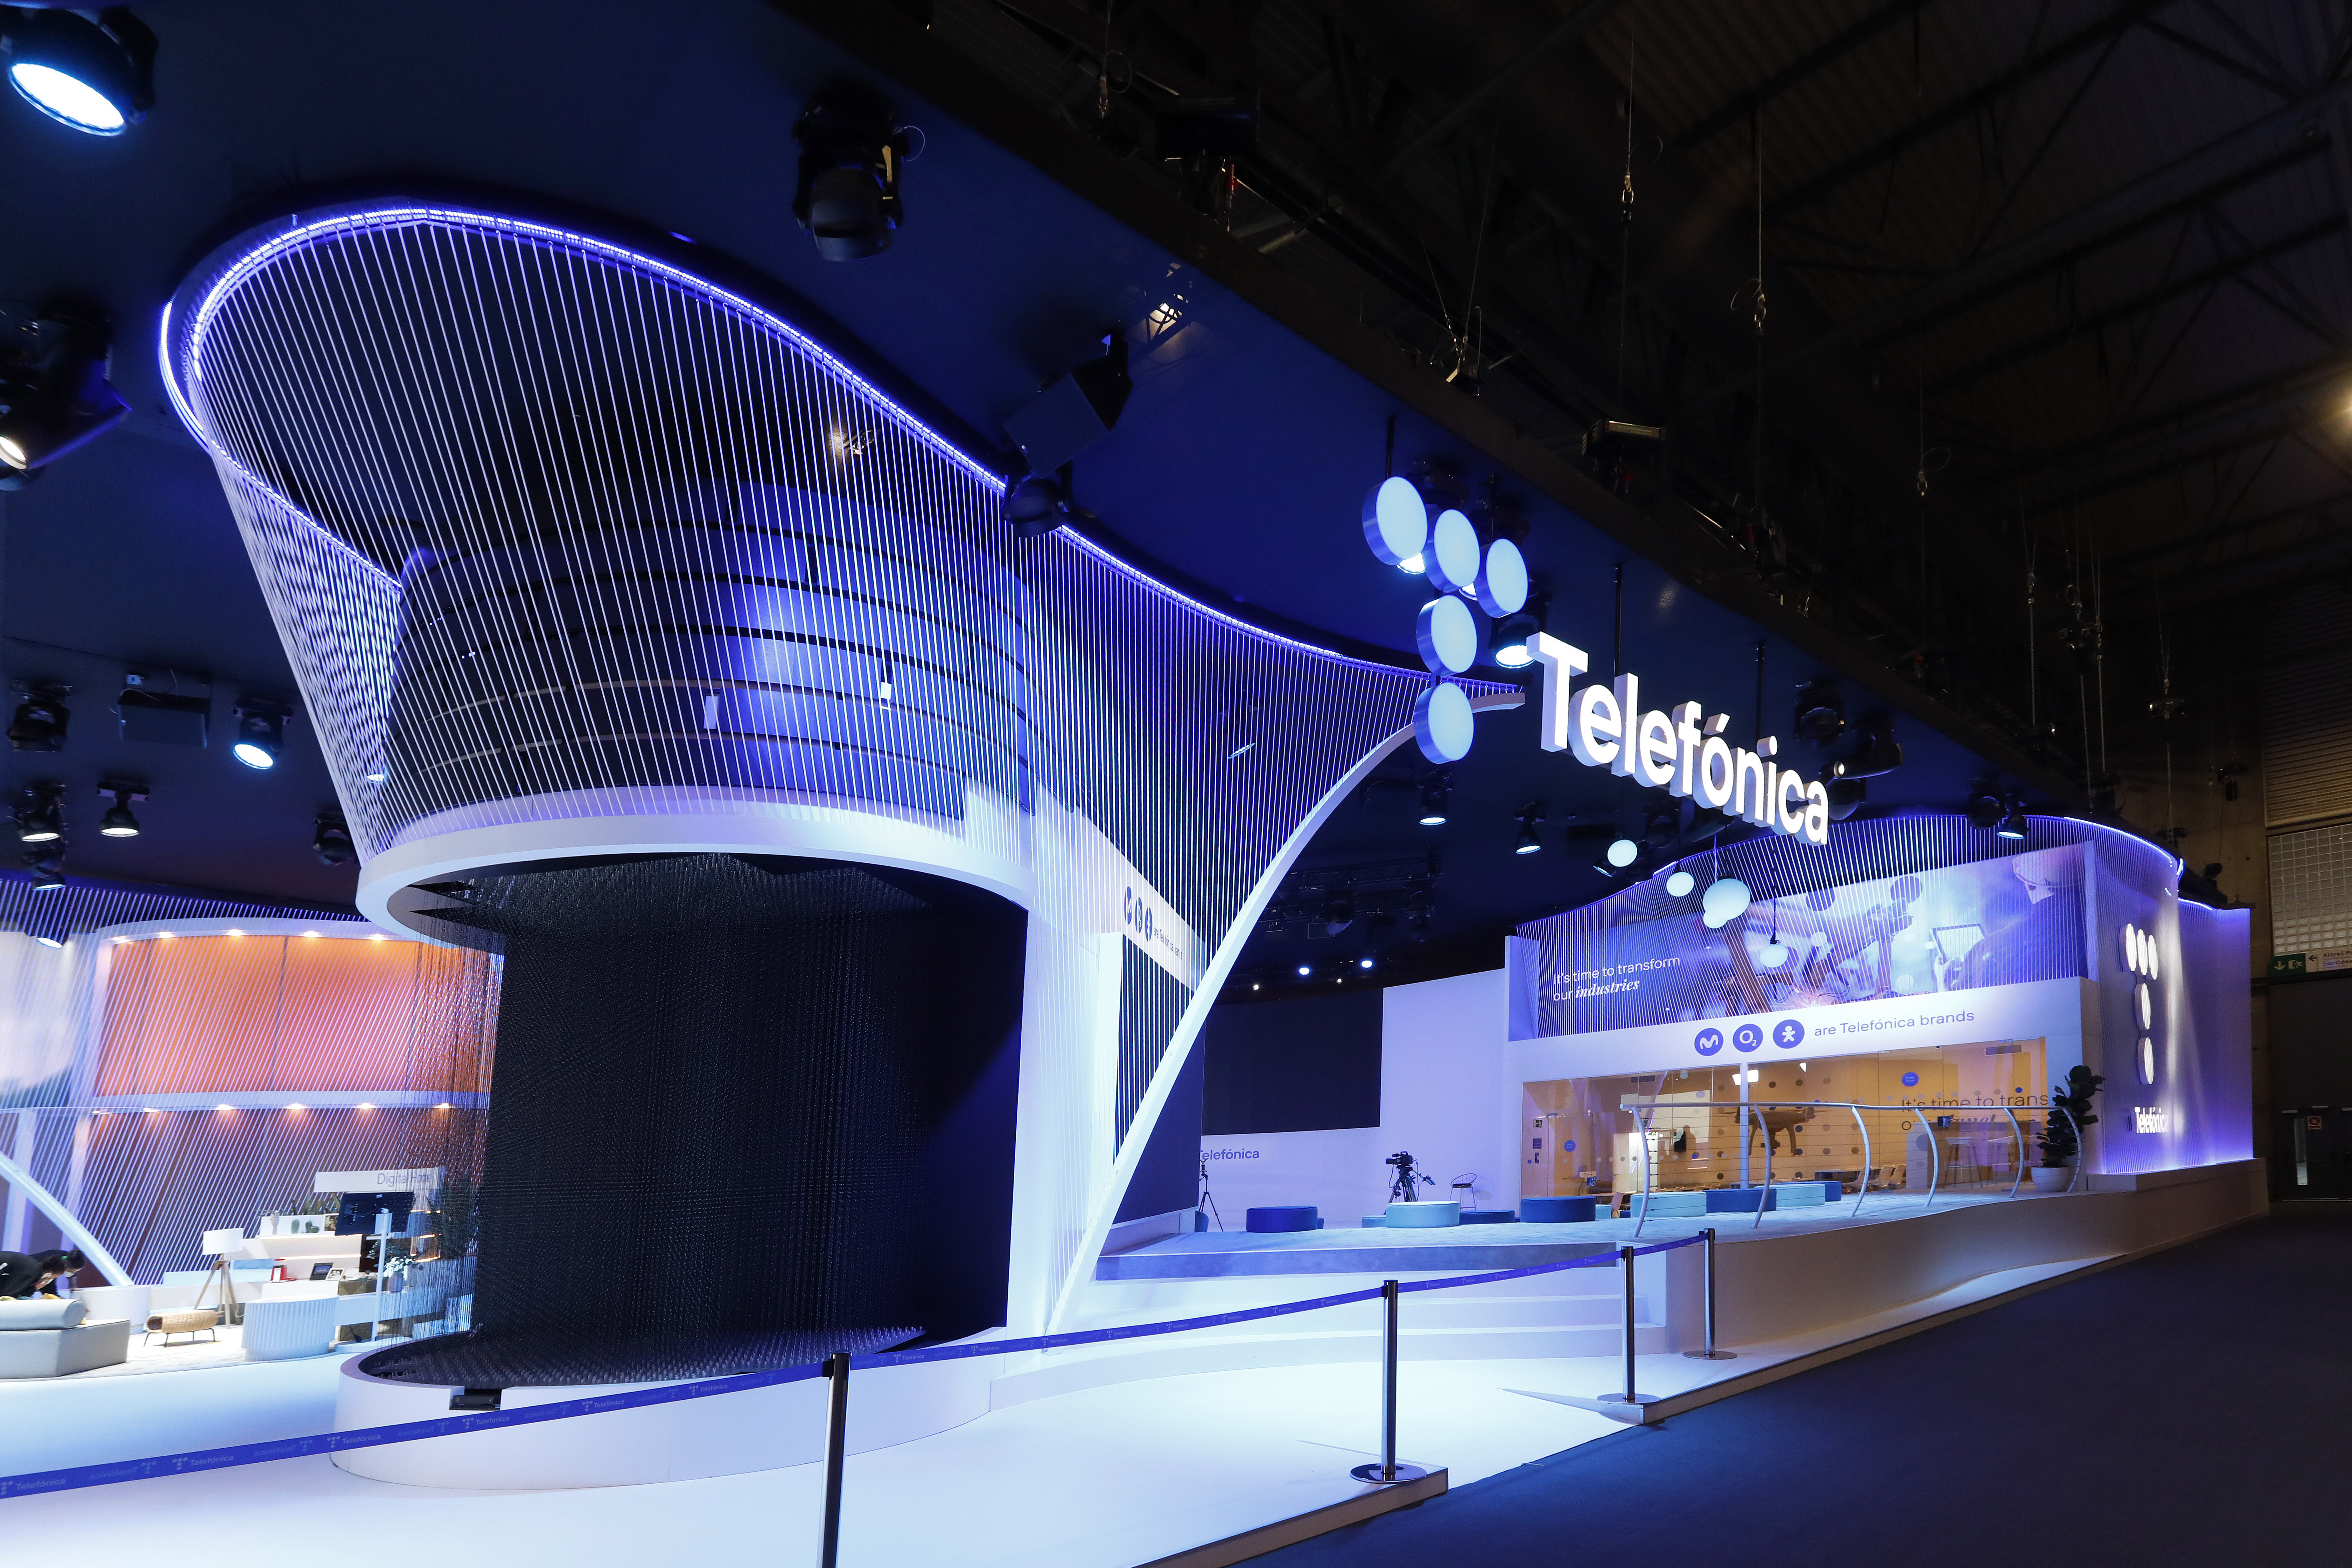 Telefónica Stand at MWC 2022 - @Arduino Vannucchi